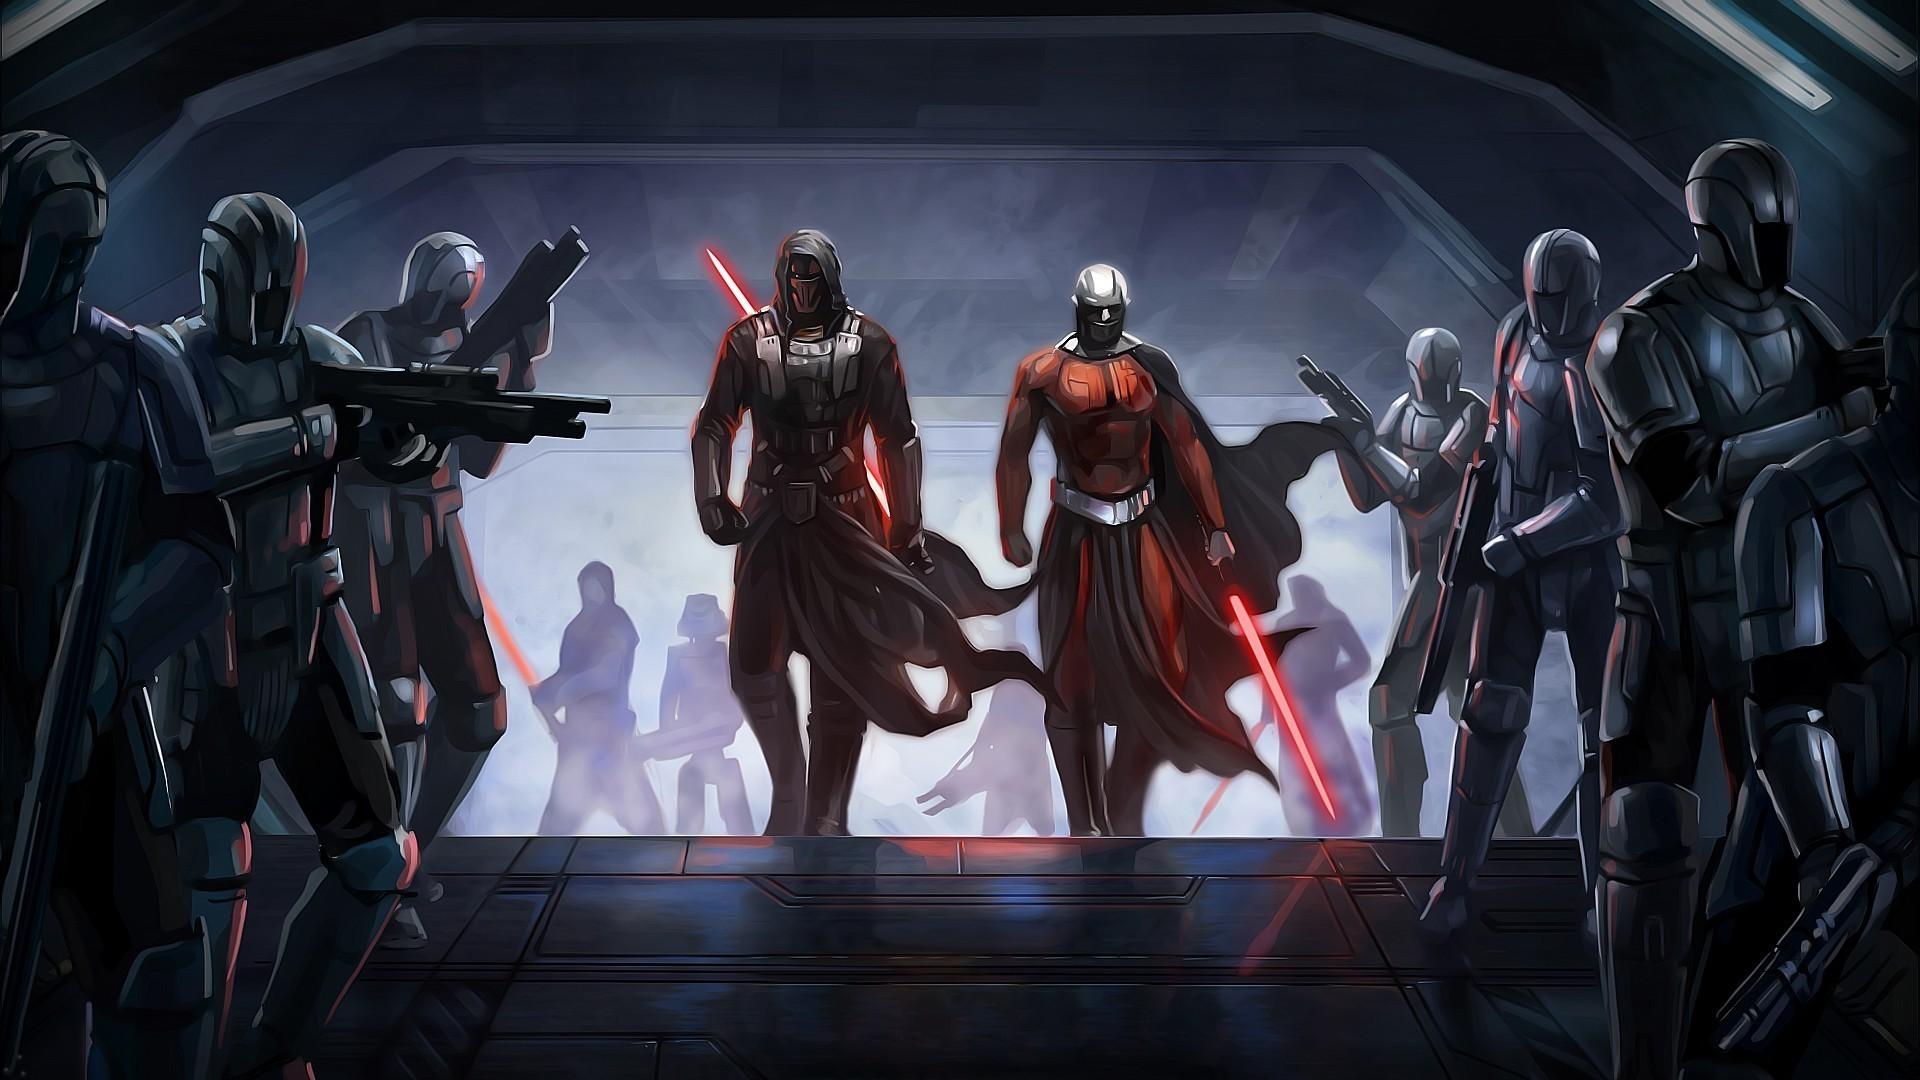 Star Wars Knights Of The Old Republic Wallpapers Wallpaper Cave